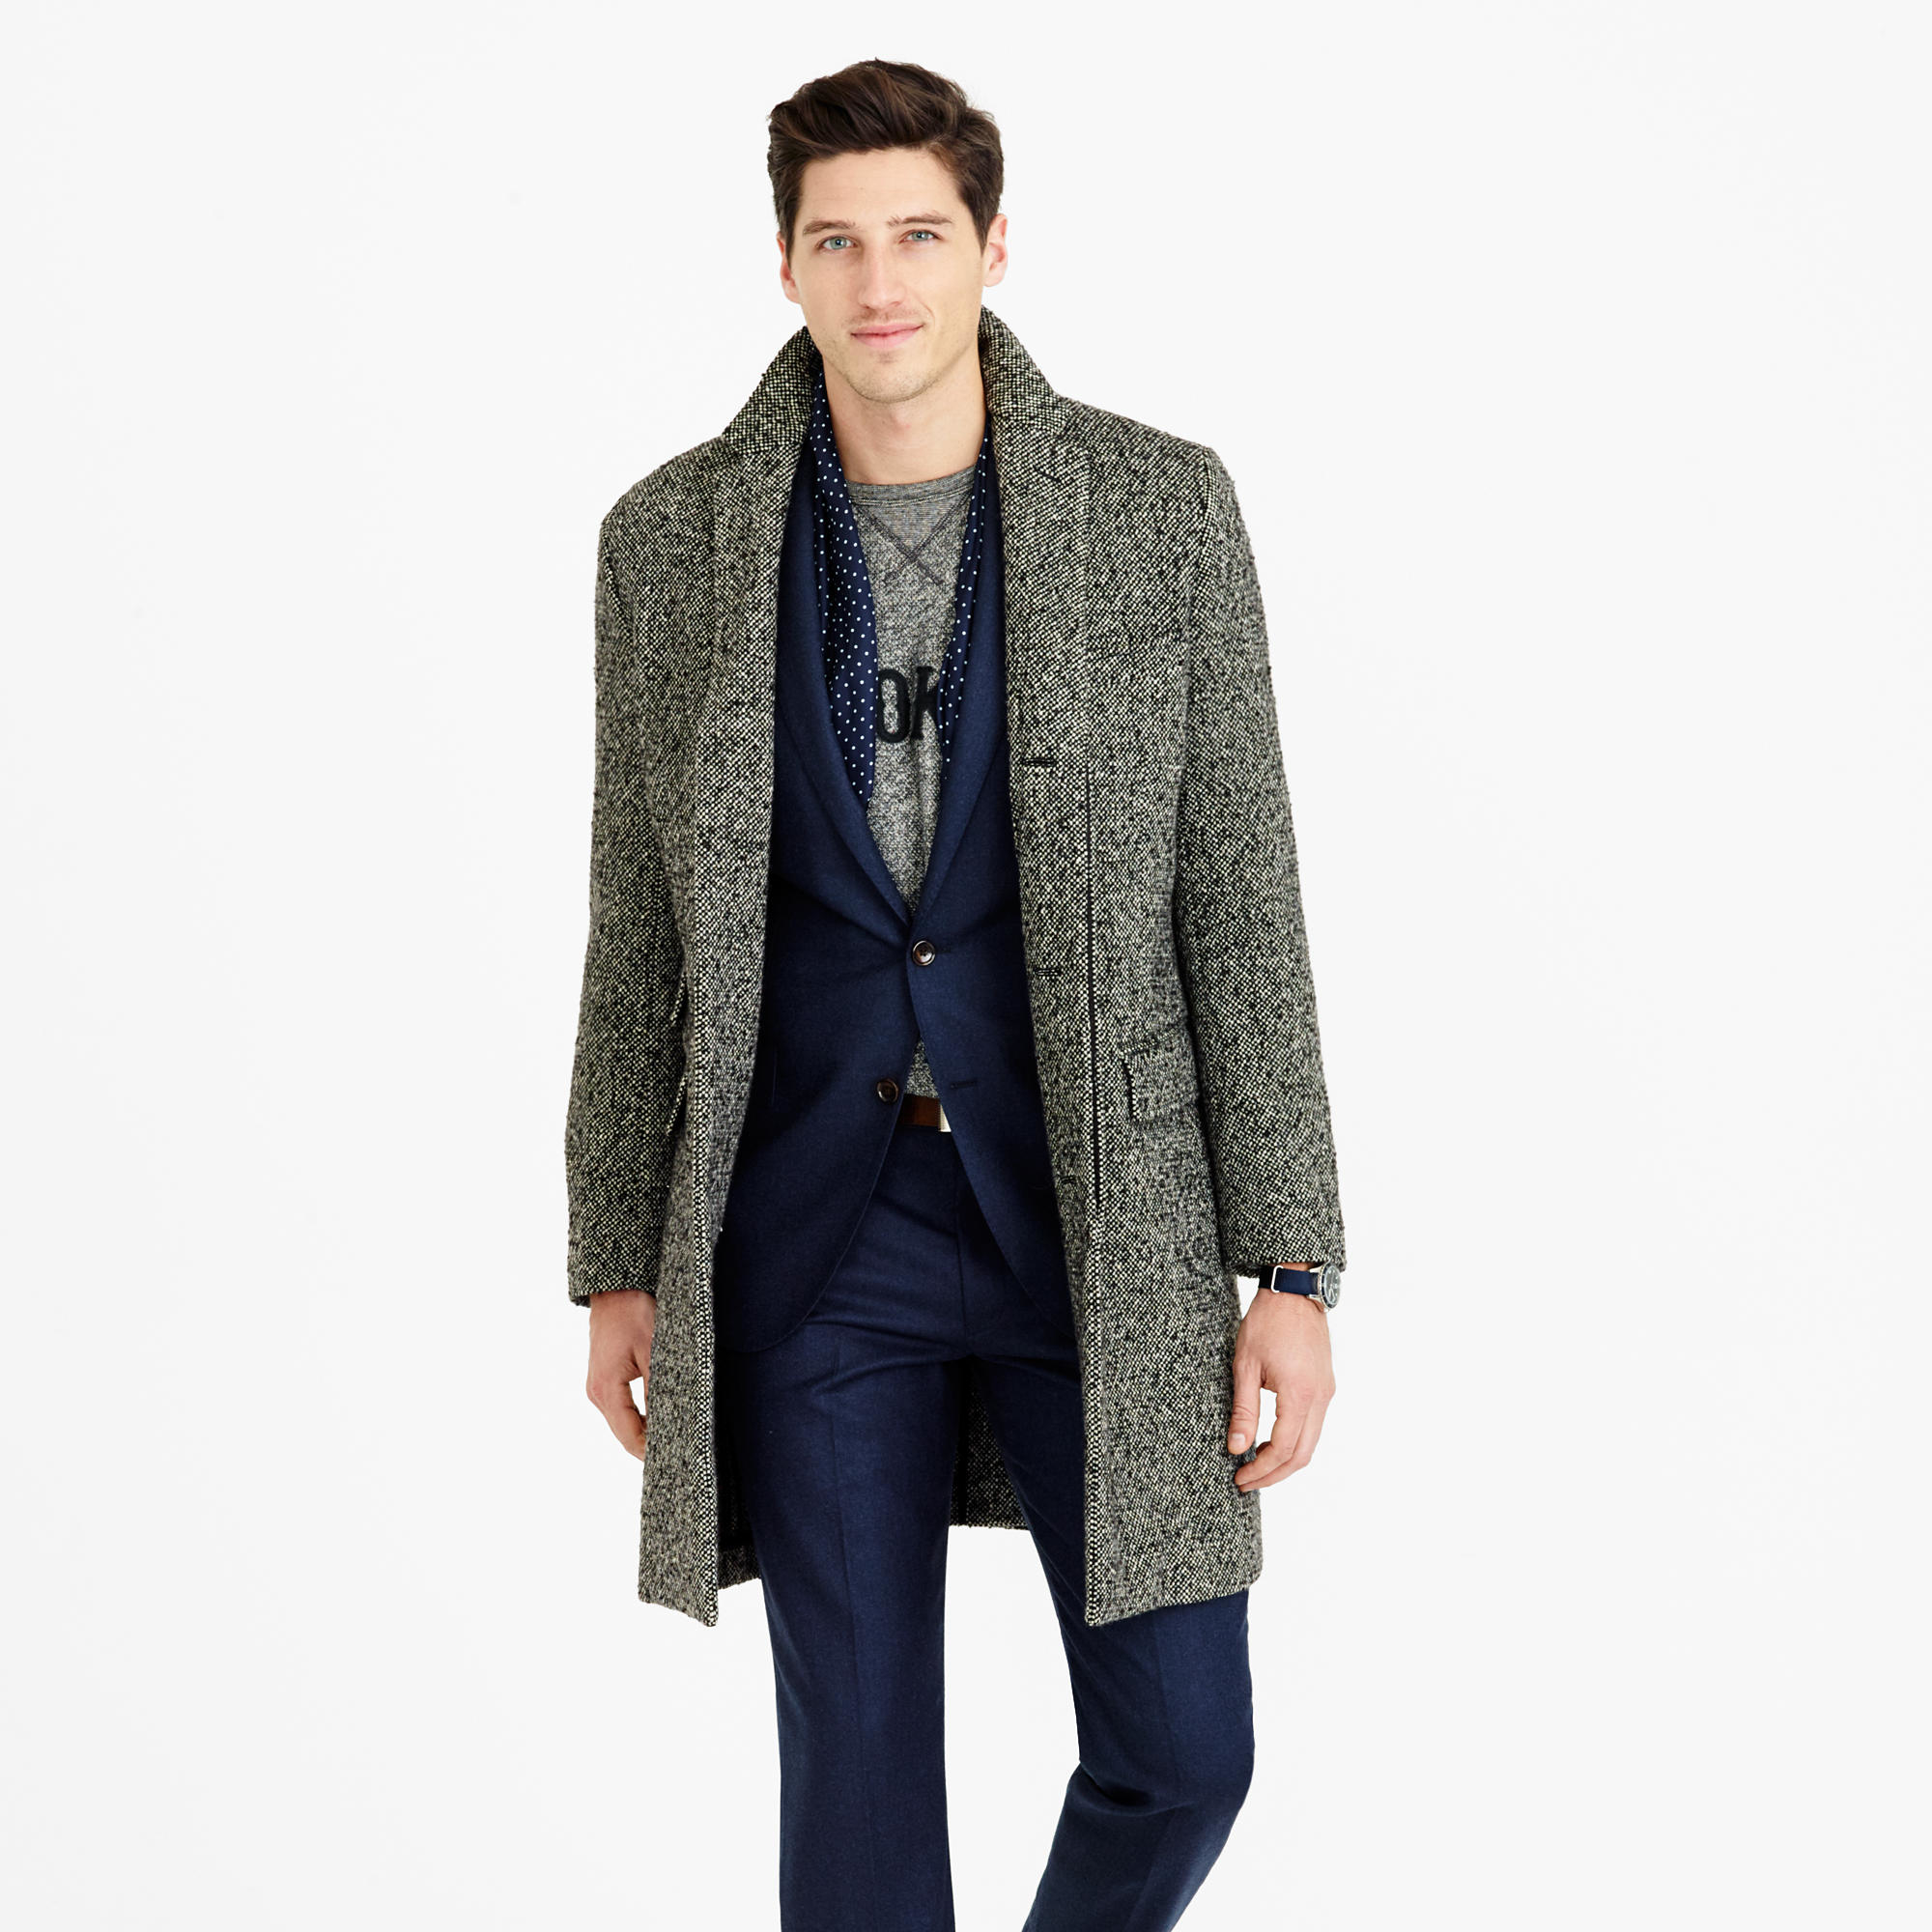 Recommendation for a Casual Winter Coat (Possibly Overcoat?) :  r/malefashionadvice